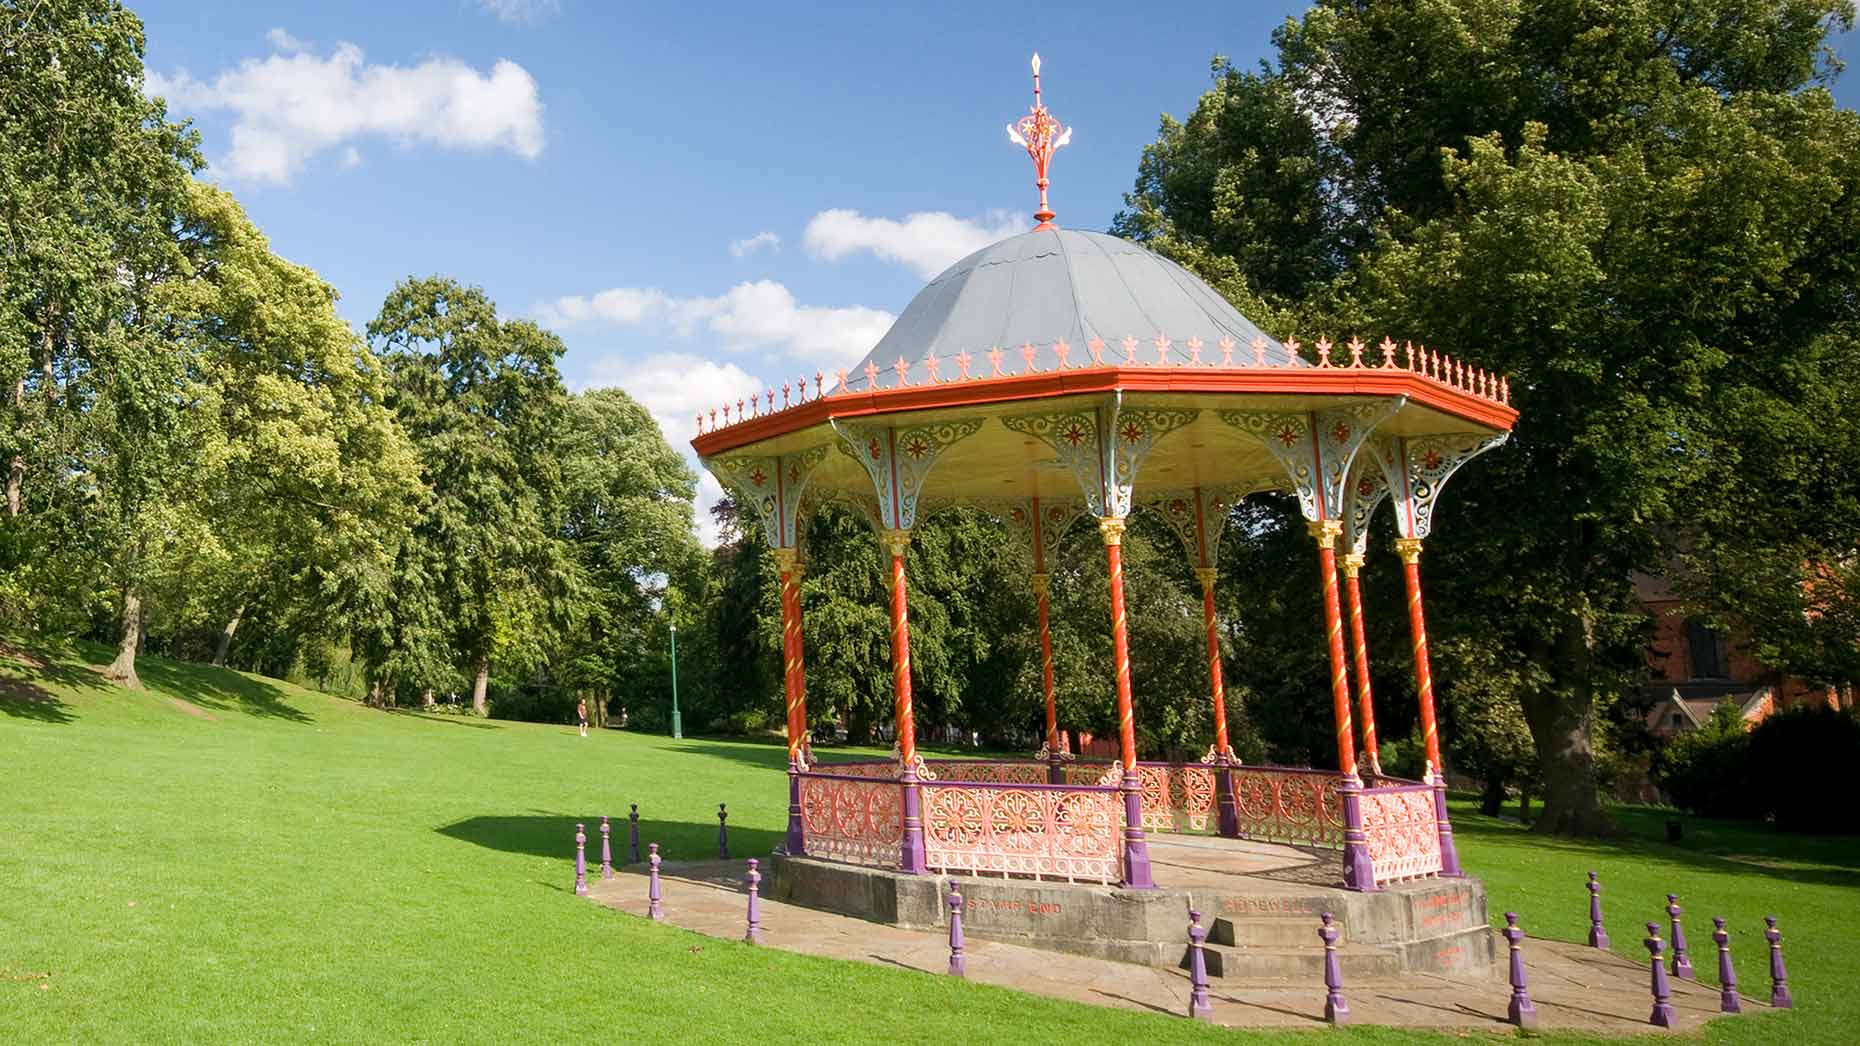 The bandstand in the Arboretum in Lincoln. Photo: CoLC